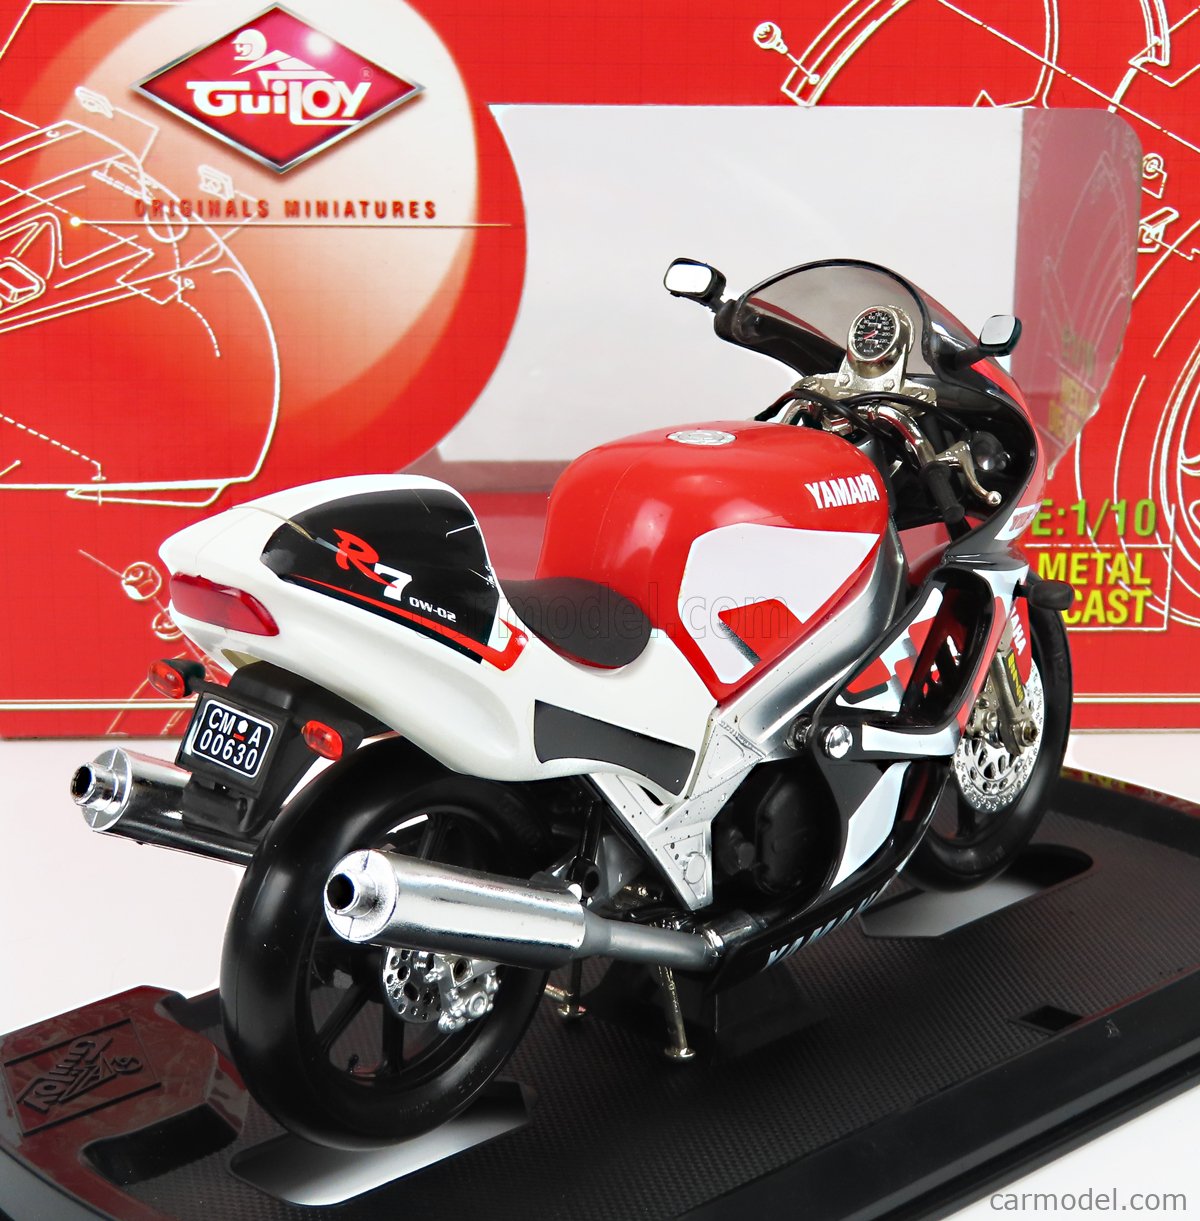 GUILOY 13640 Masstab: 1/10  YAMAHA YZF R7 OW-02 1988 RED WHITE BLACK